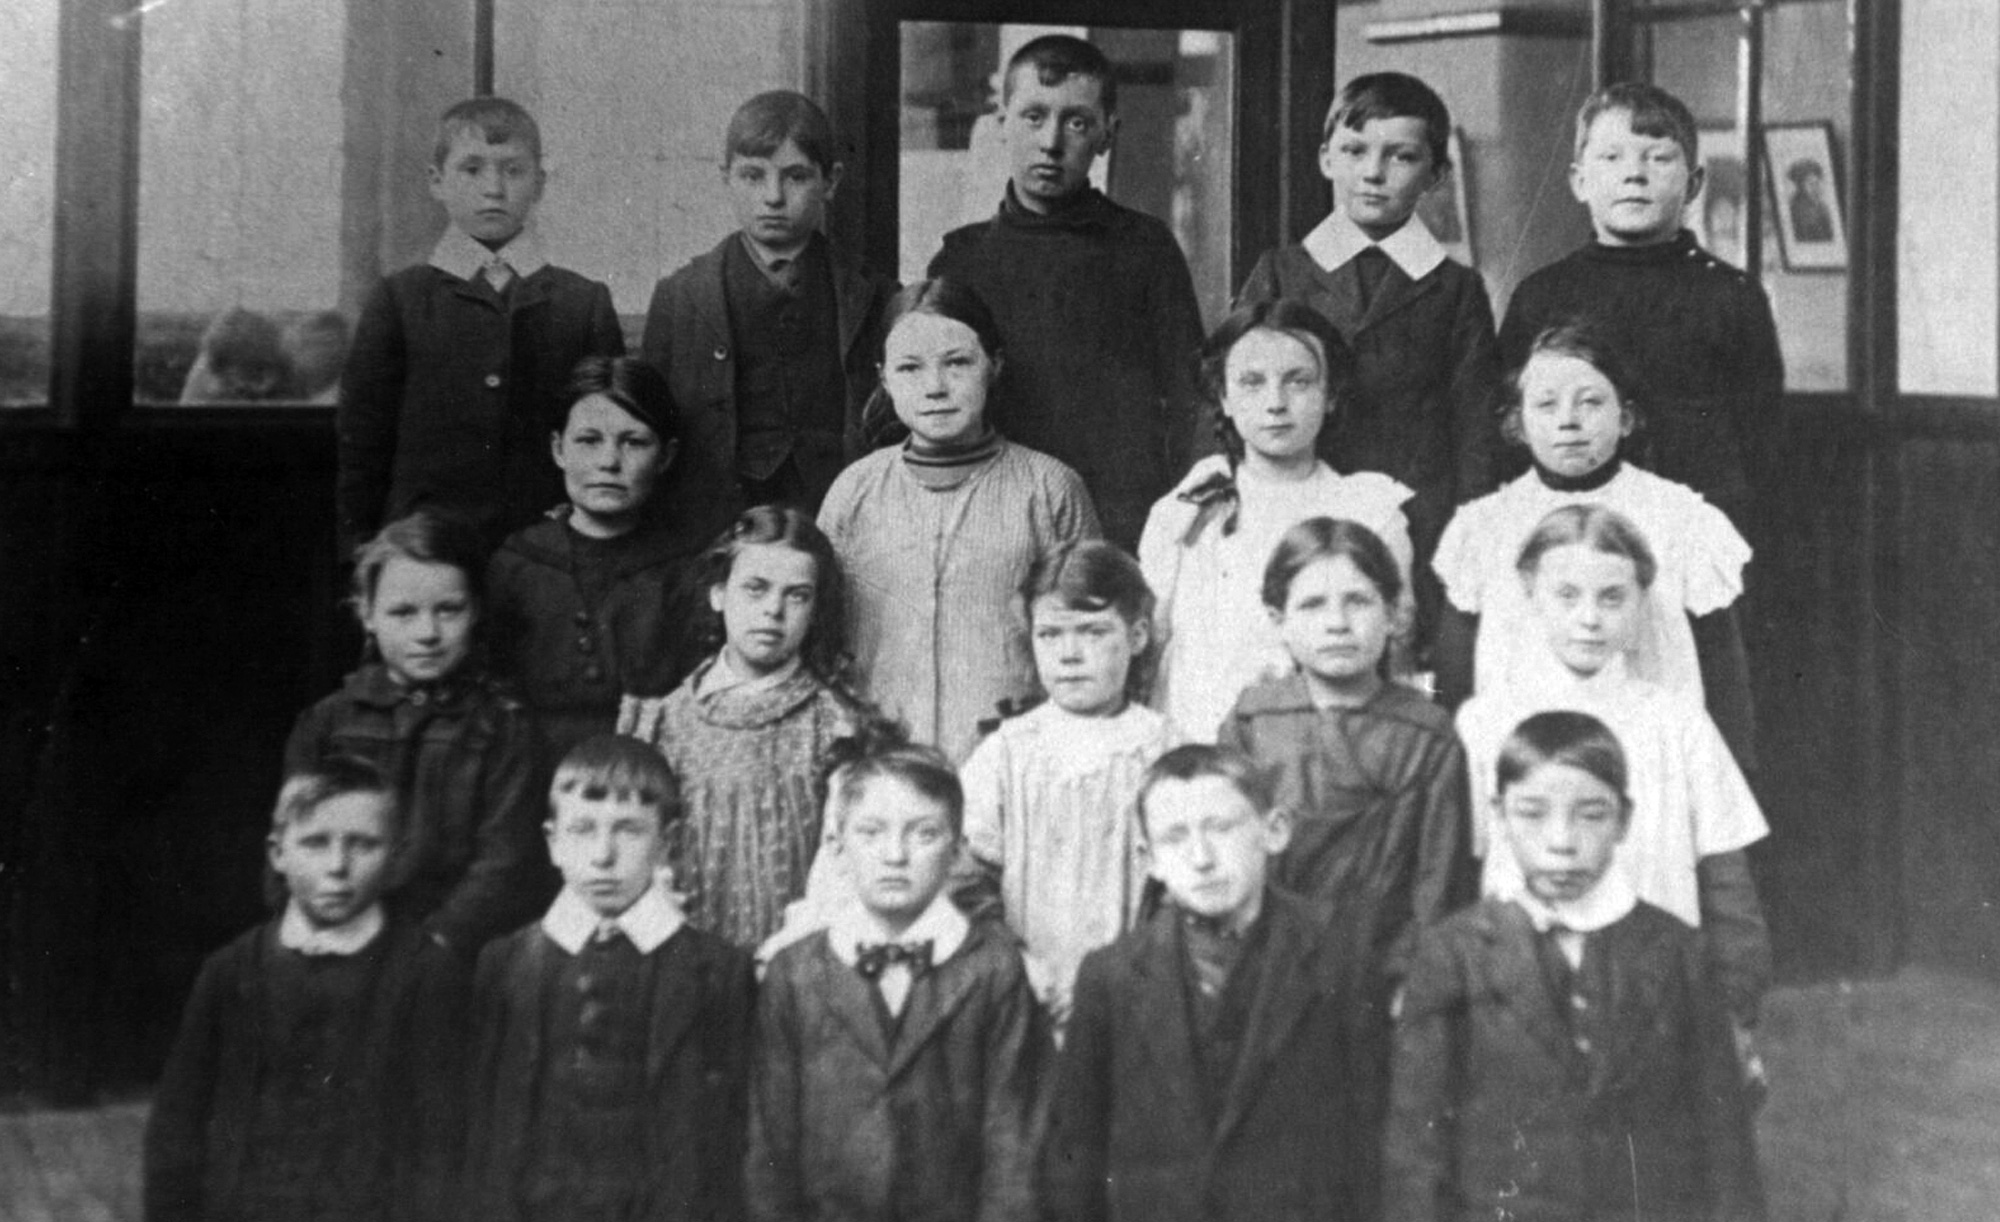 Walbottle Primary class of 1924-25